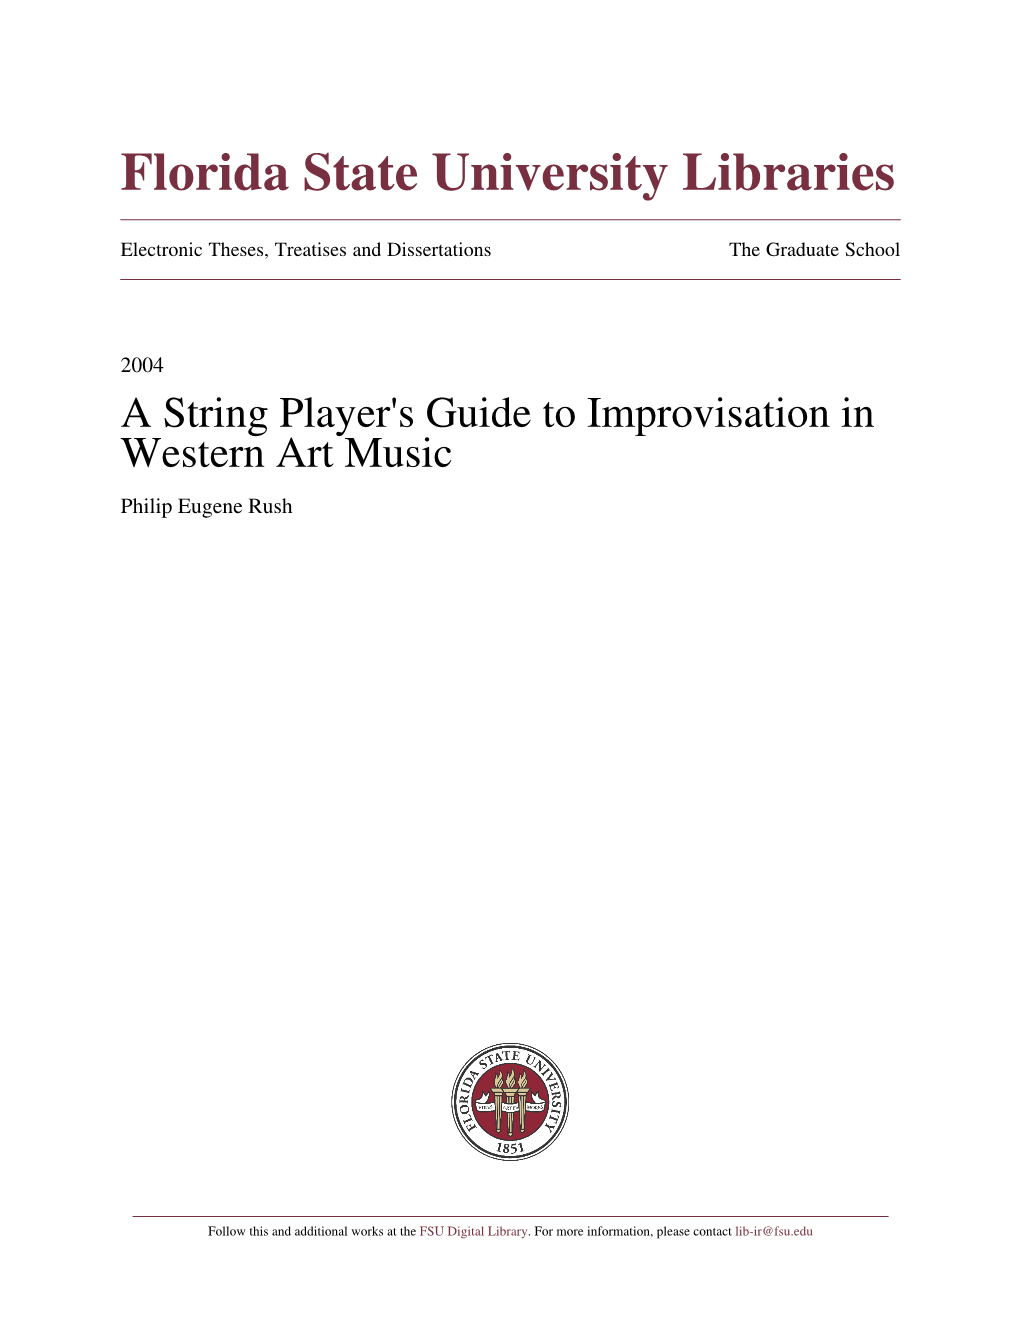 A String Player's Guide to Improvisation in Western Art Music Philip Eugene Rush